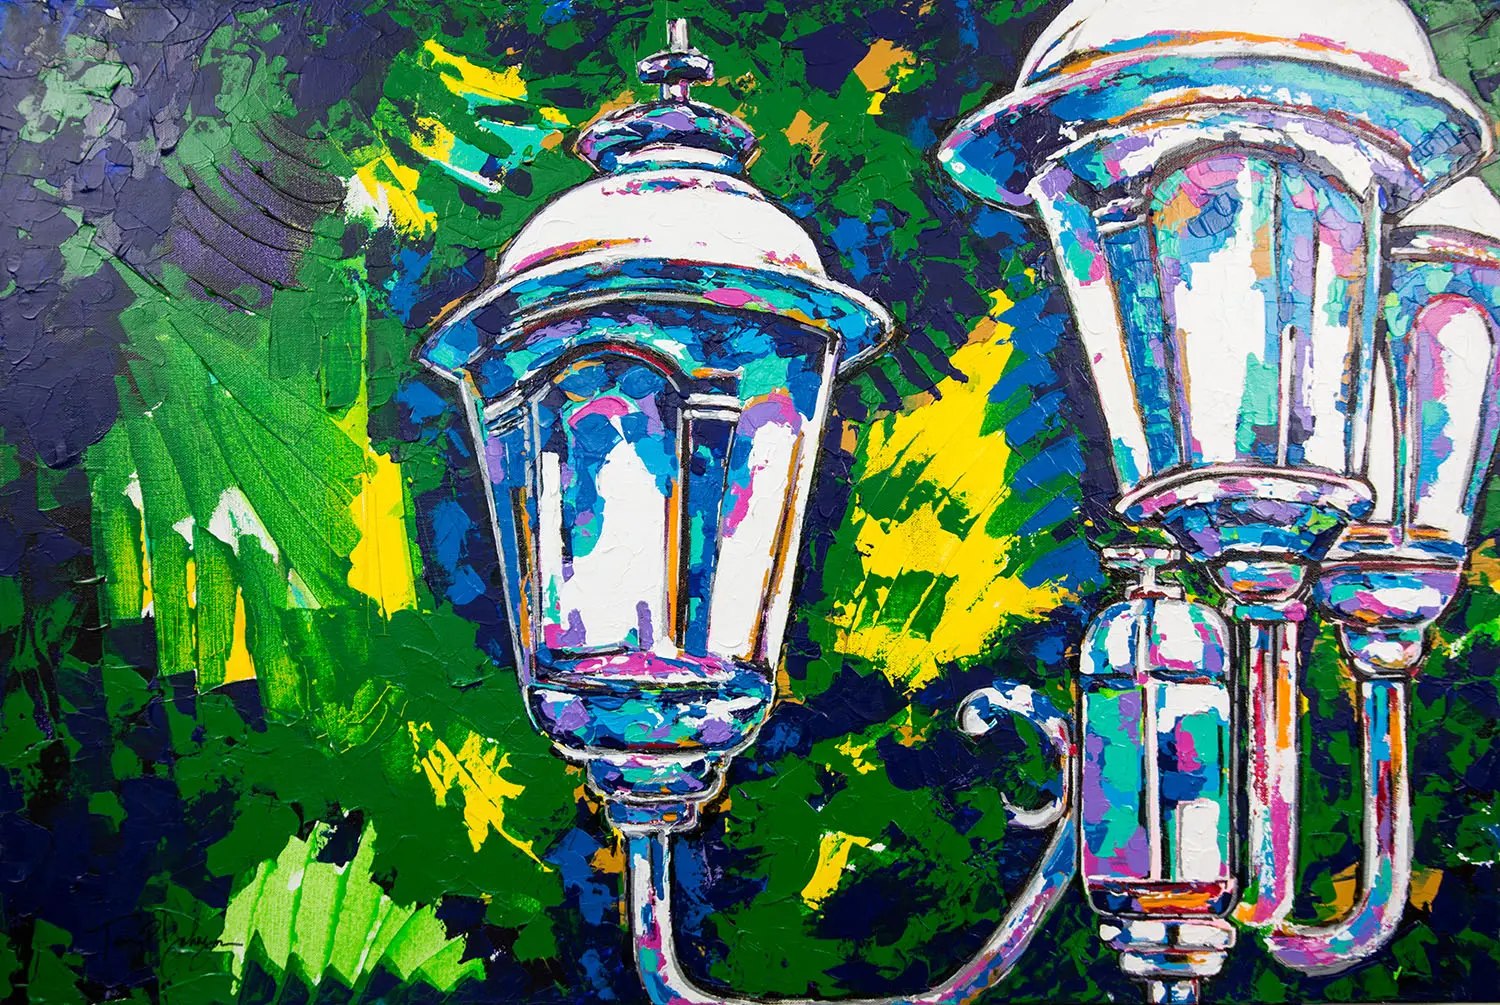 A painting of two lamps on the side of a wall.